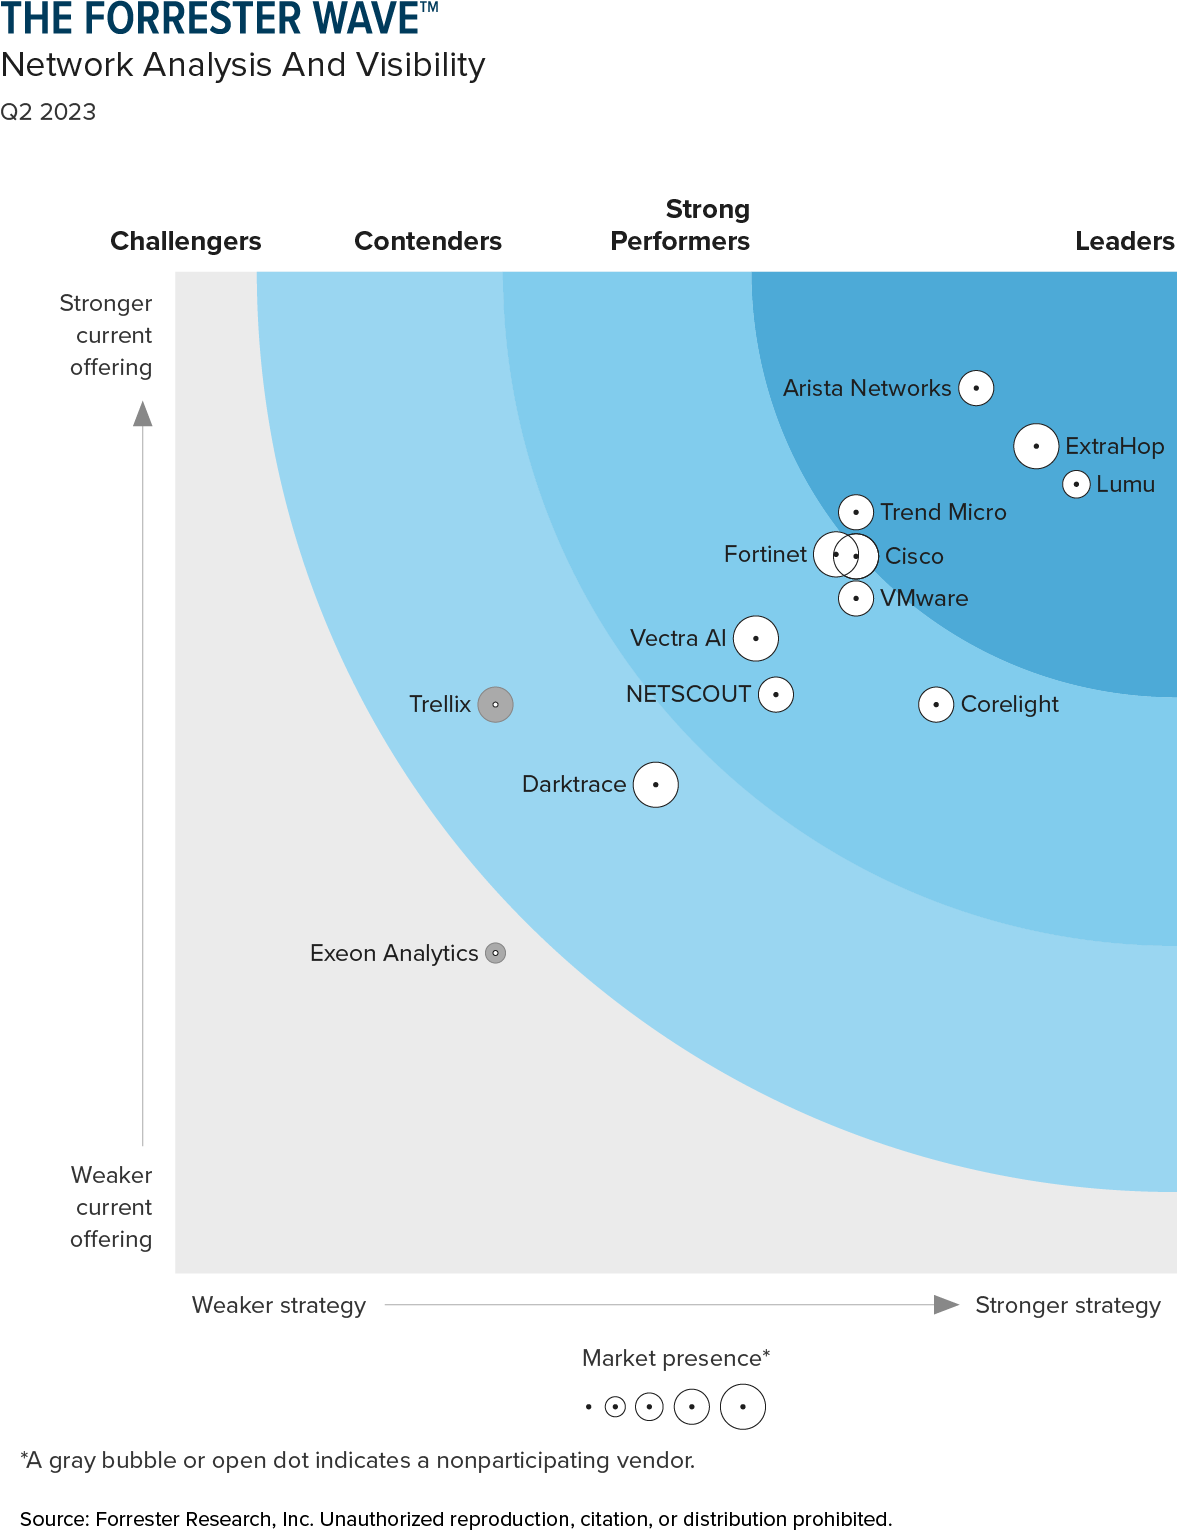 The Forrester Wave™: Network Analysis And Visibility, Q2 2023